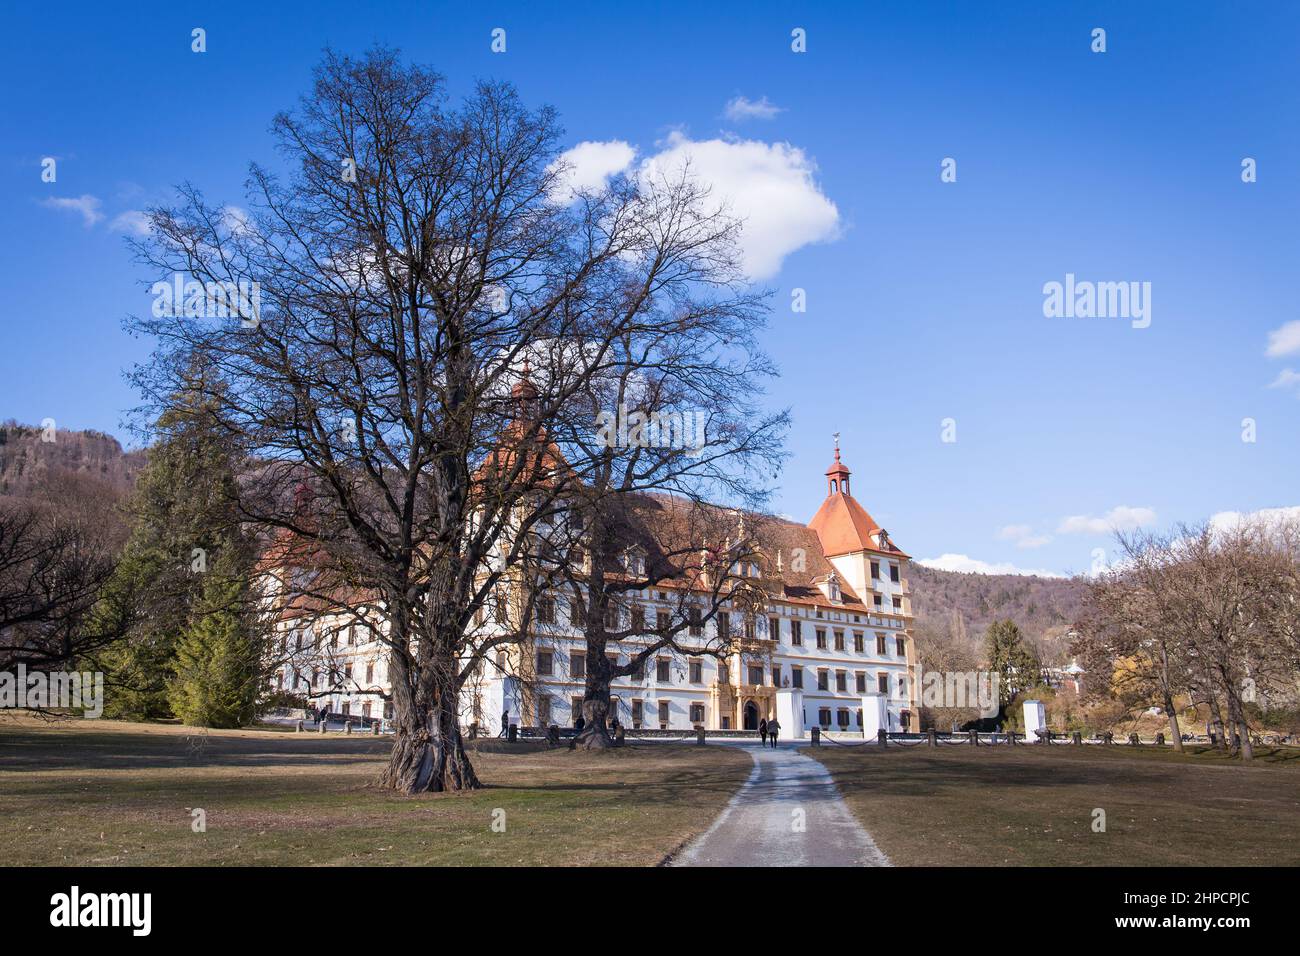 The baroque Schloss Eggenberg castle with its park in Graz, Austria during Winter Stock Photo